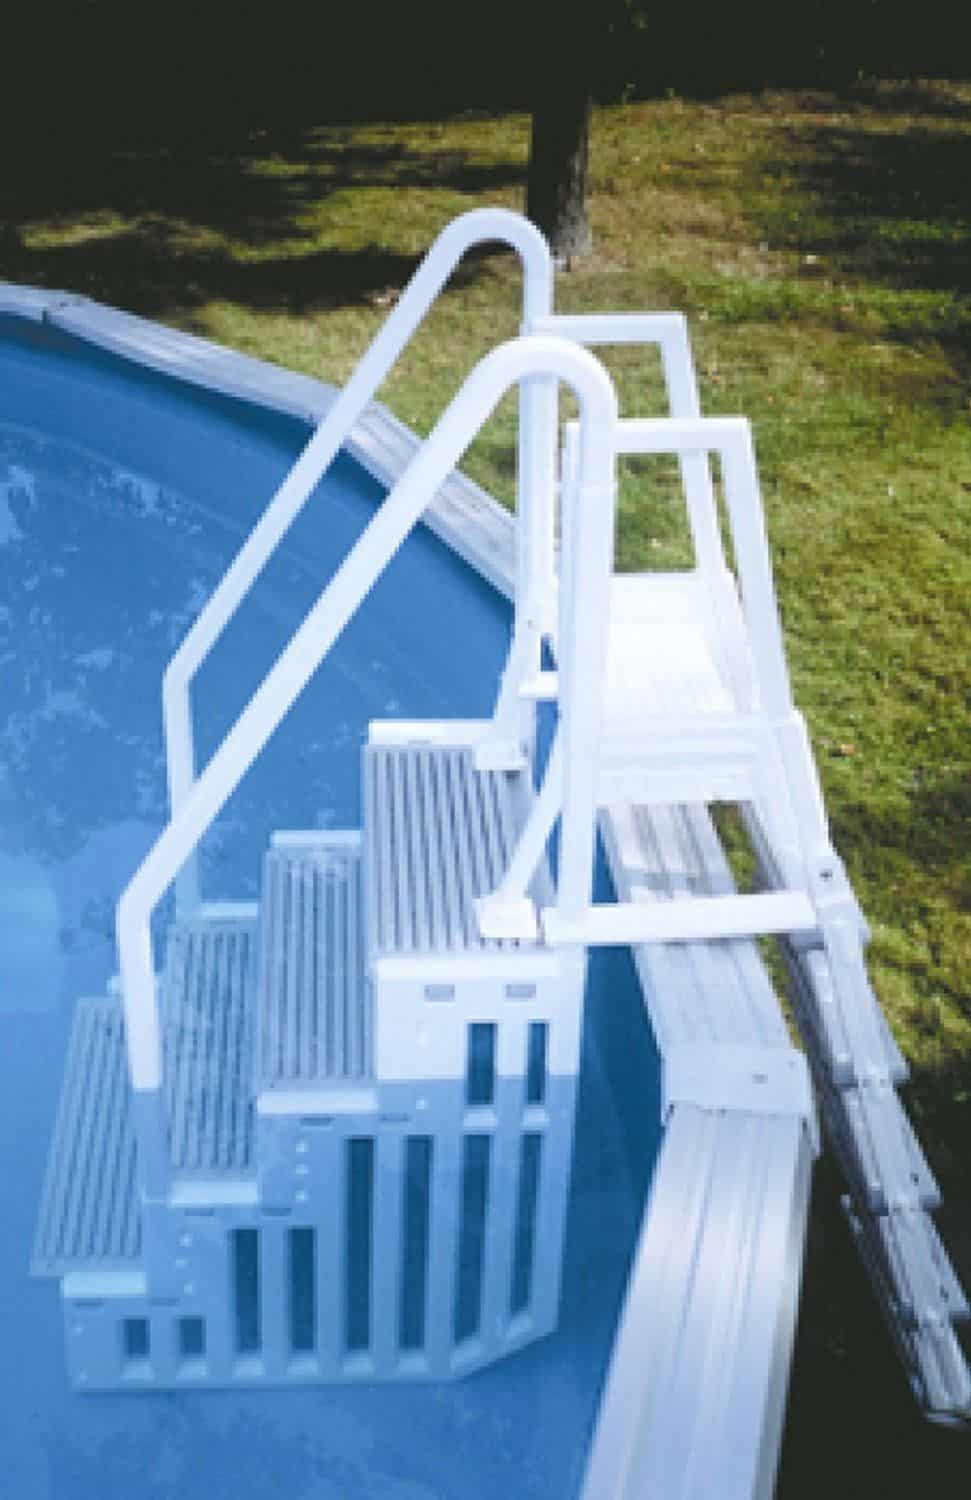 Above Ground Pool Ladder Steps
 The Best Ground Pool Ladders and Steps Home Pools Plus